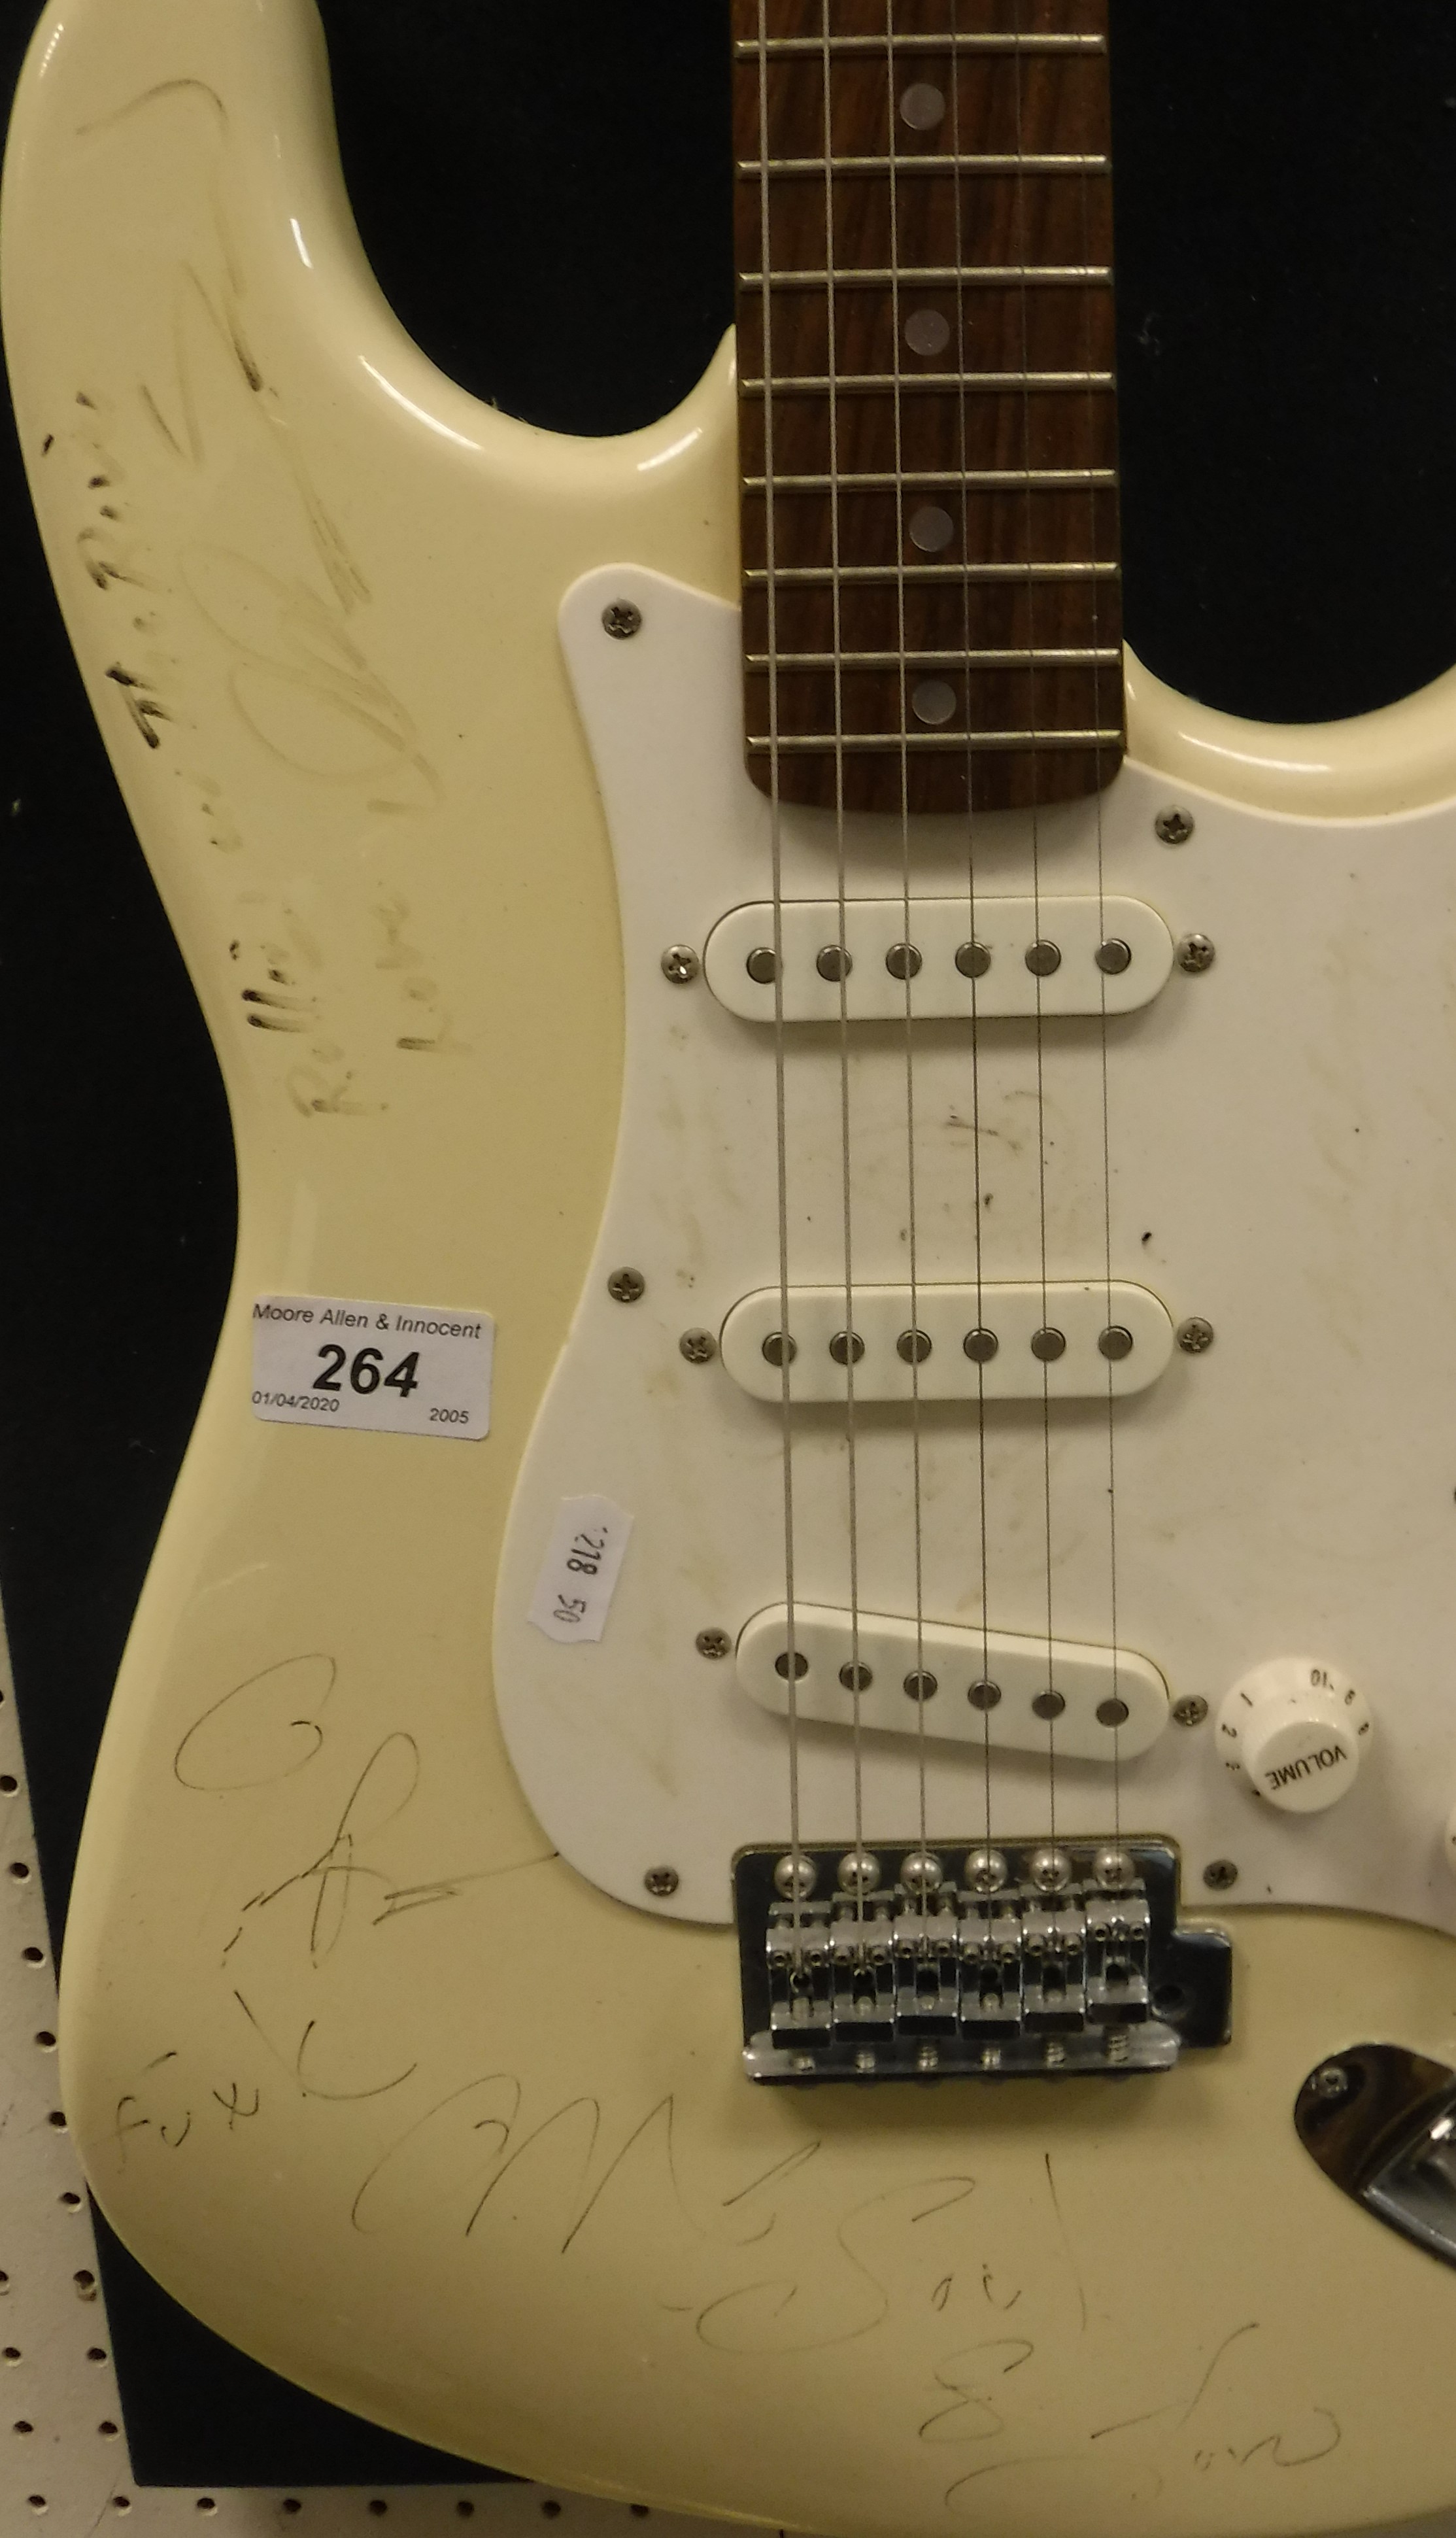 A Fender Squire Strat 6 string electric guitar, - Image 2 of 5